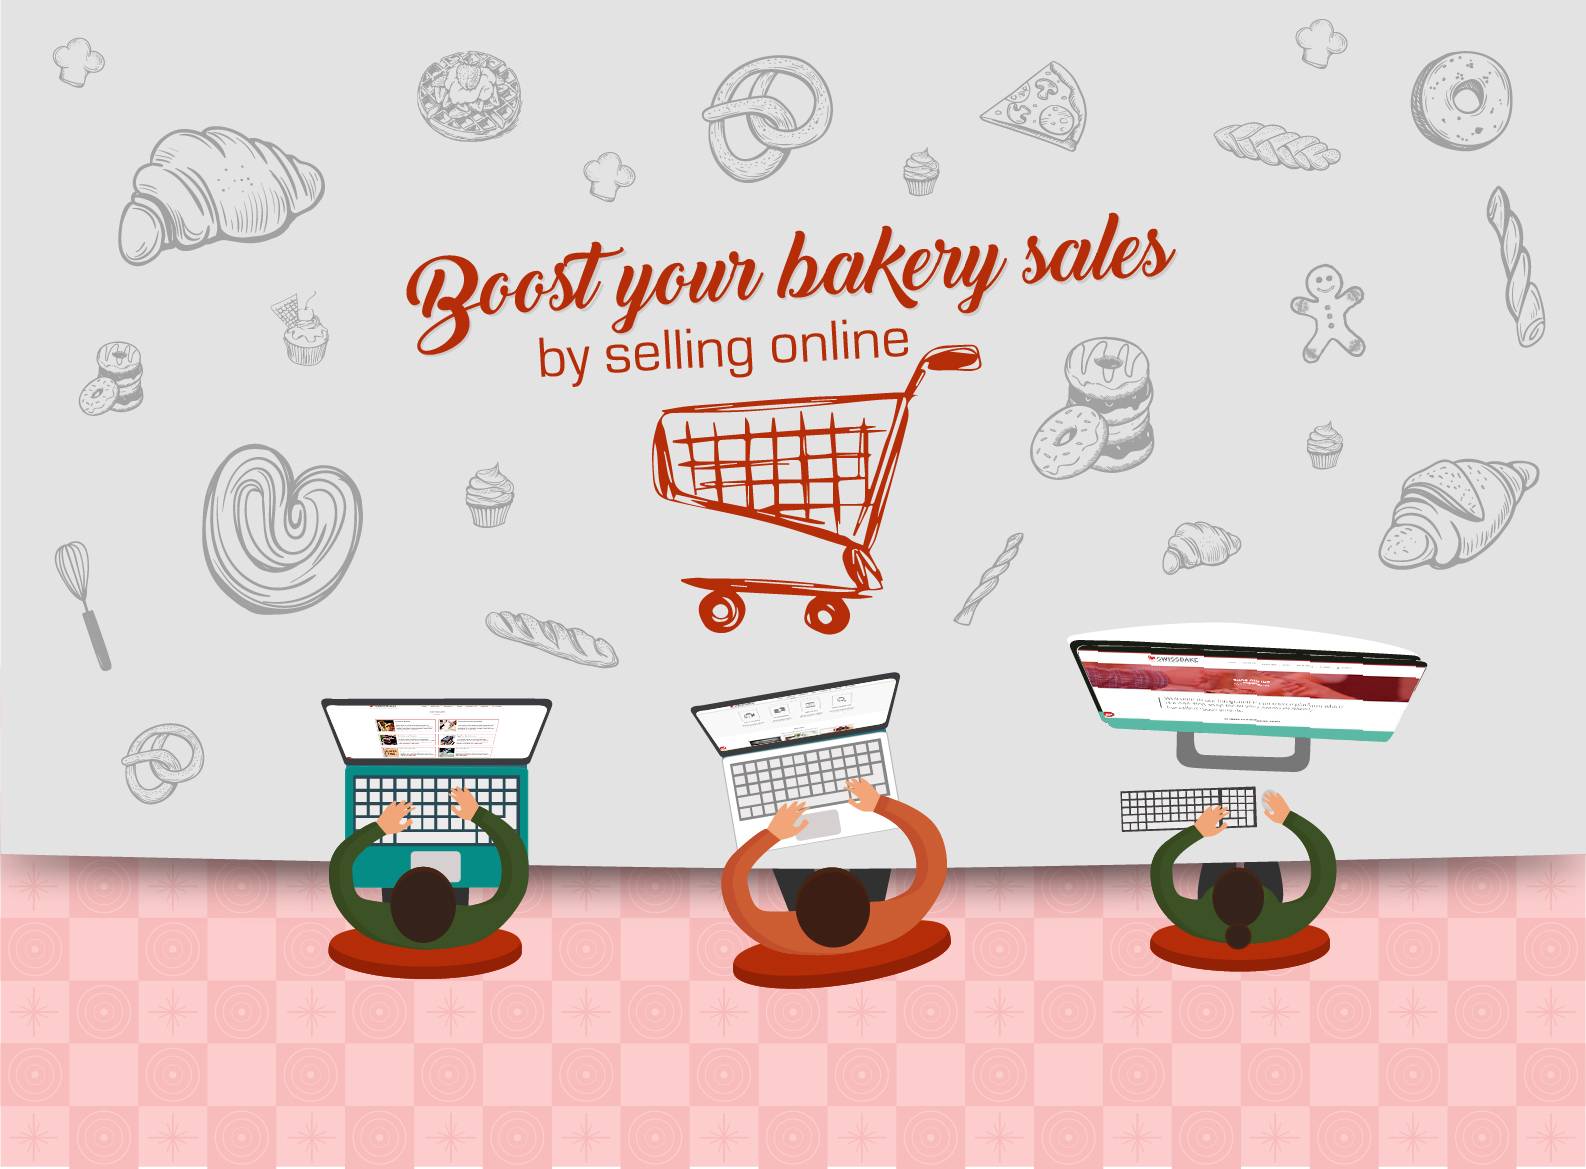 Boost your Bakery sales by selling online